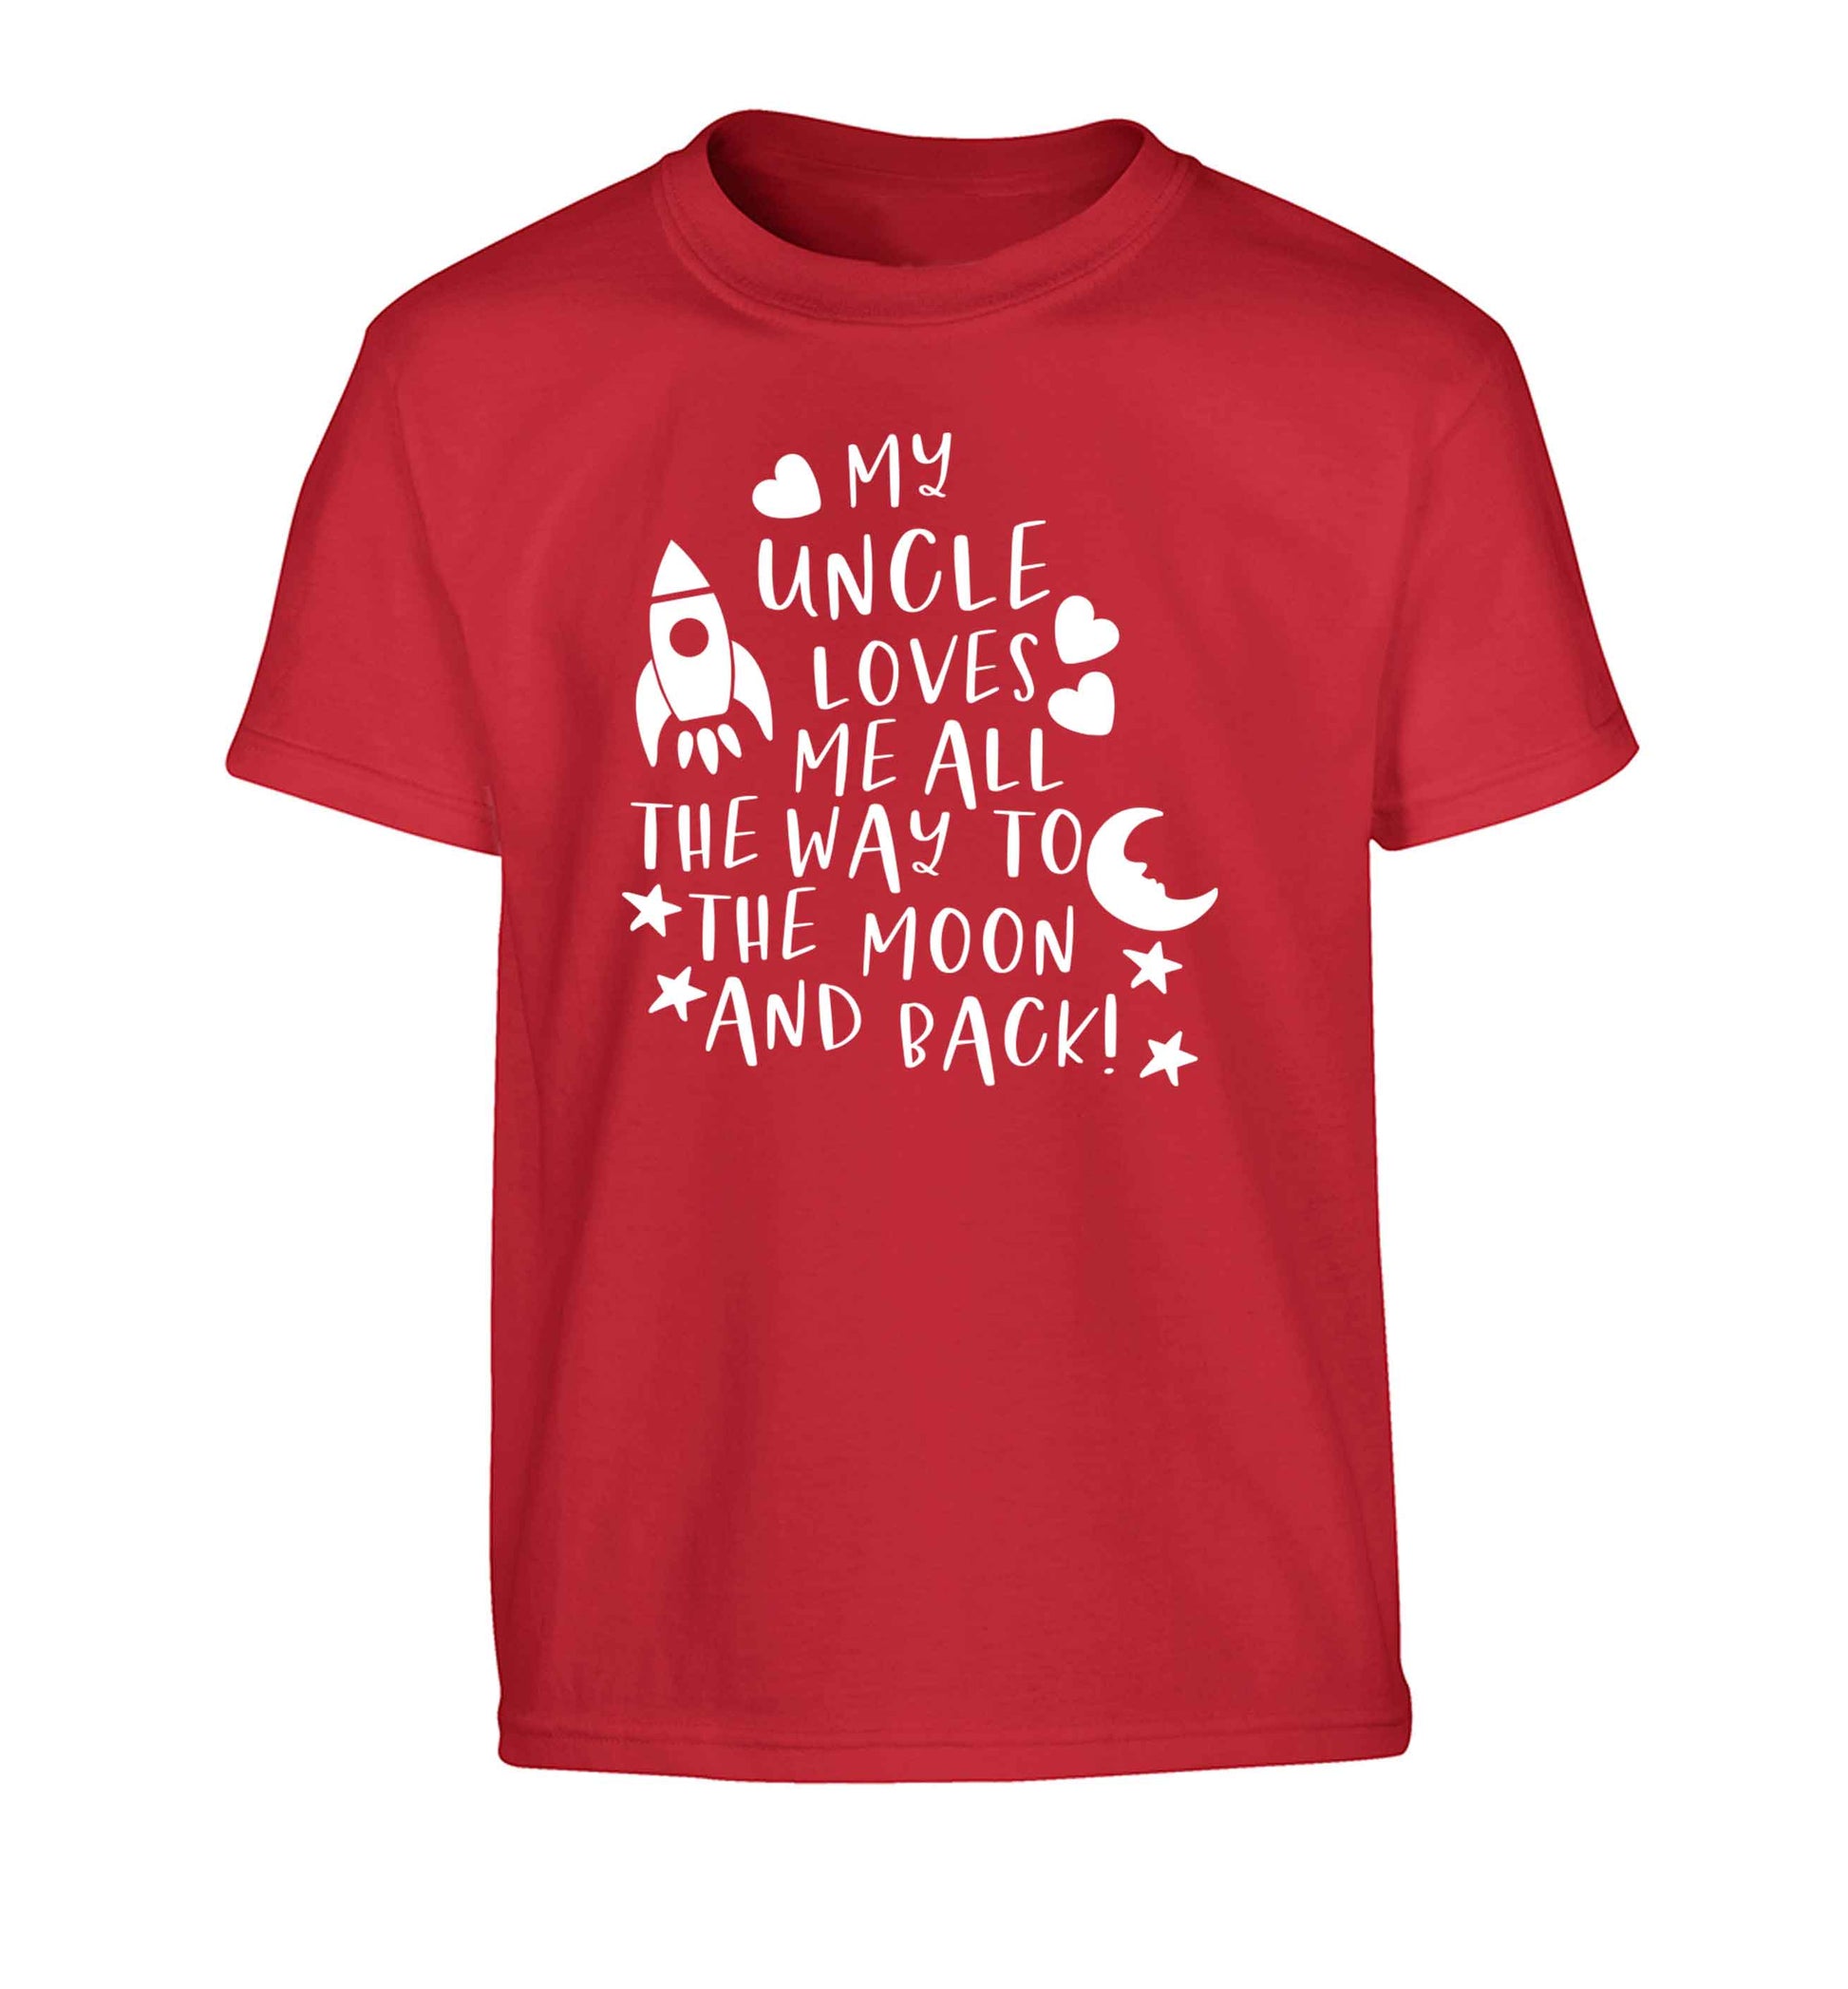 My uncle loves me all the way to the moon and back Children's red Tshirt 12-13 Years